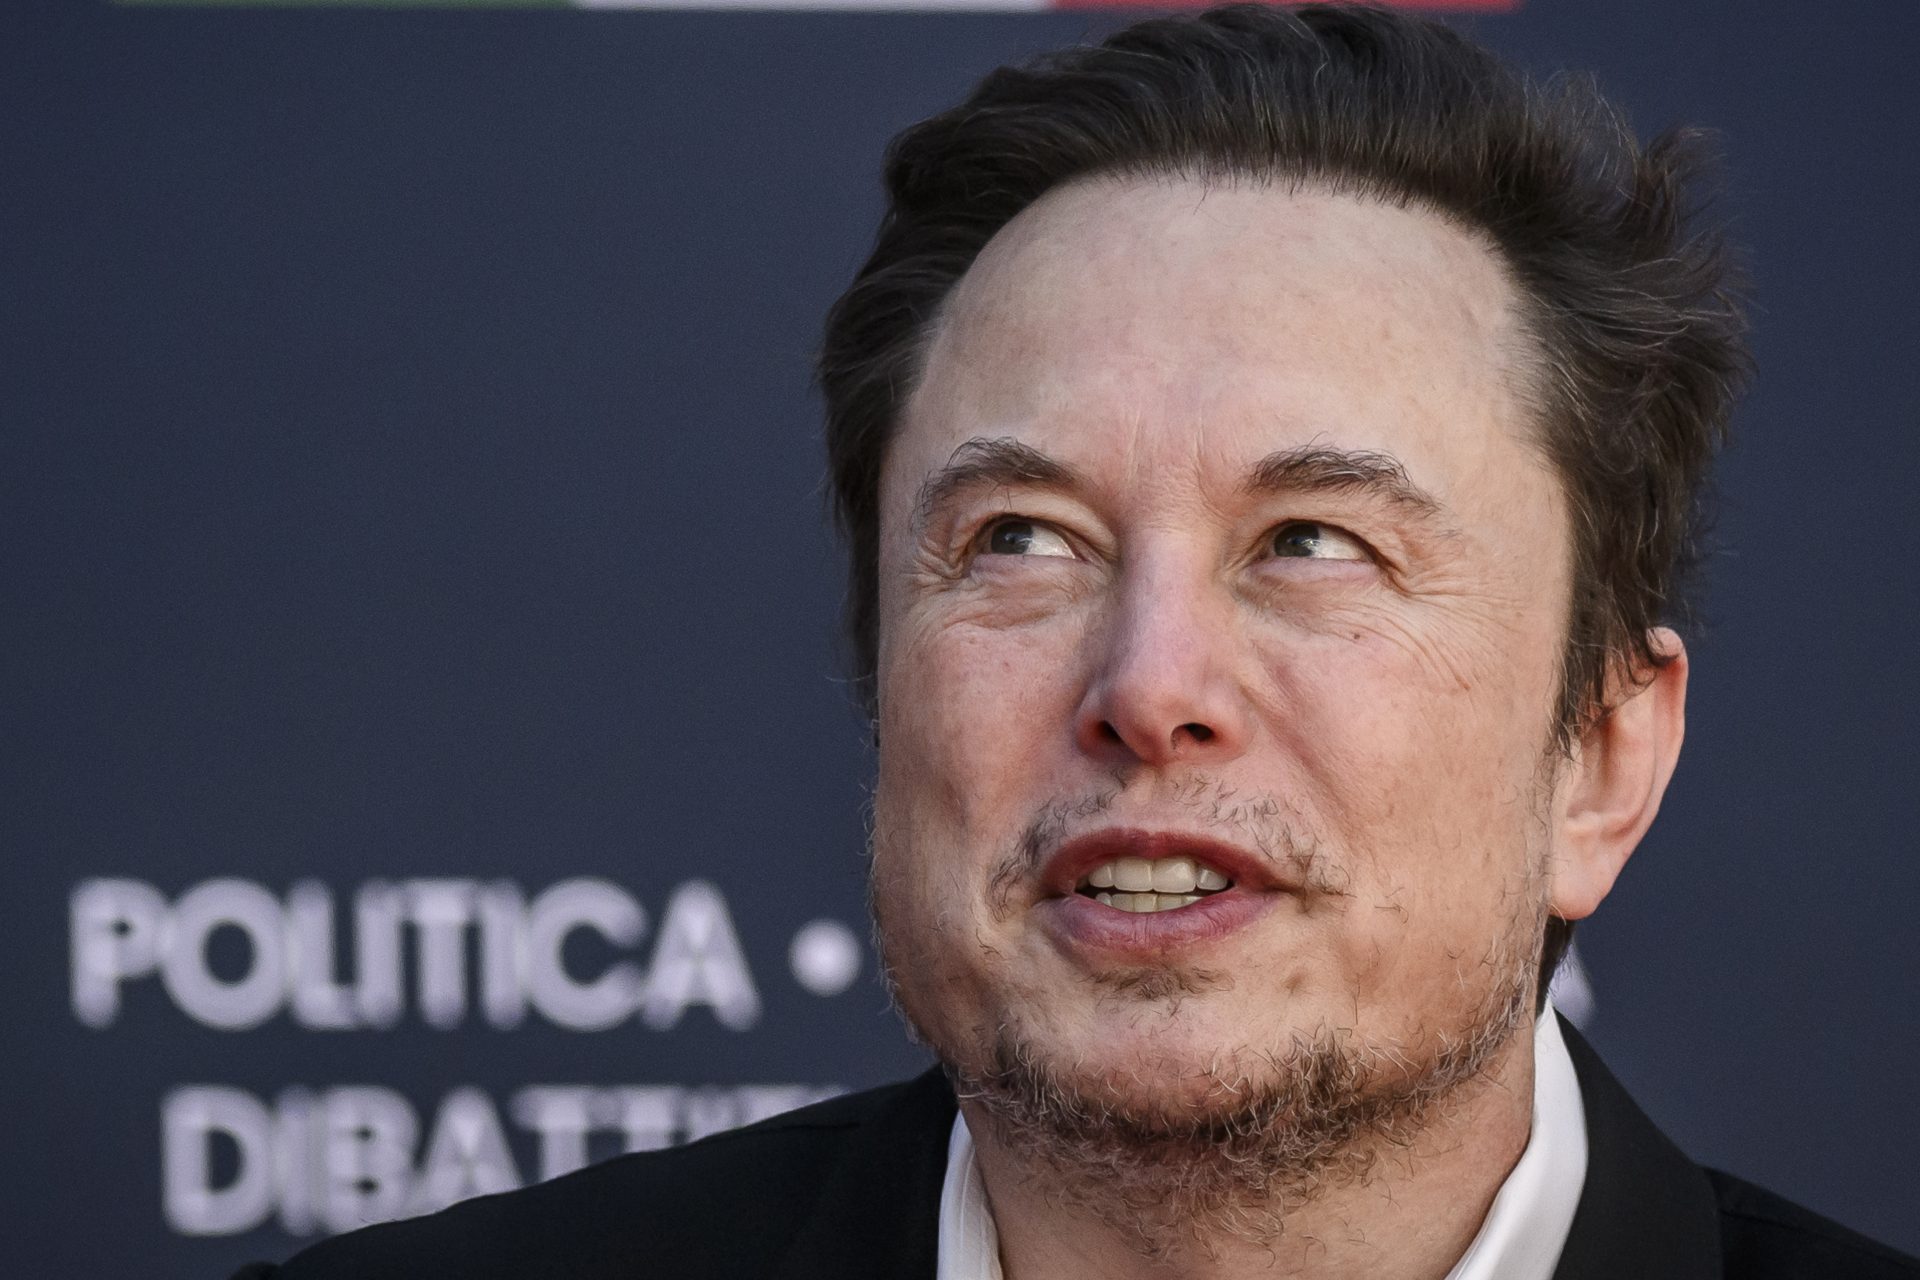 Tesla and SpaceX executives concerned that Elon Musk is ‘high’ on something